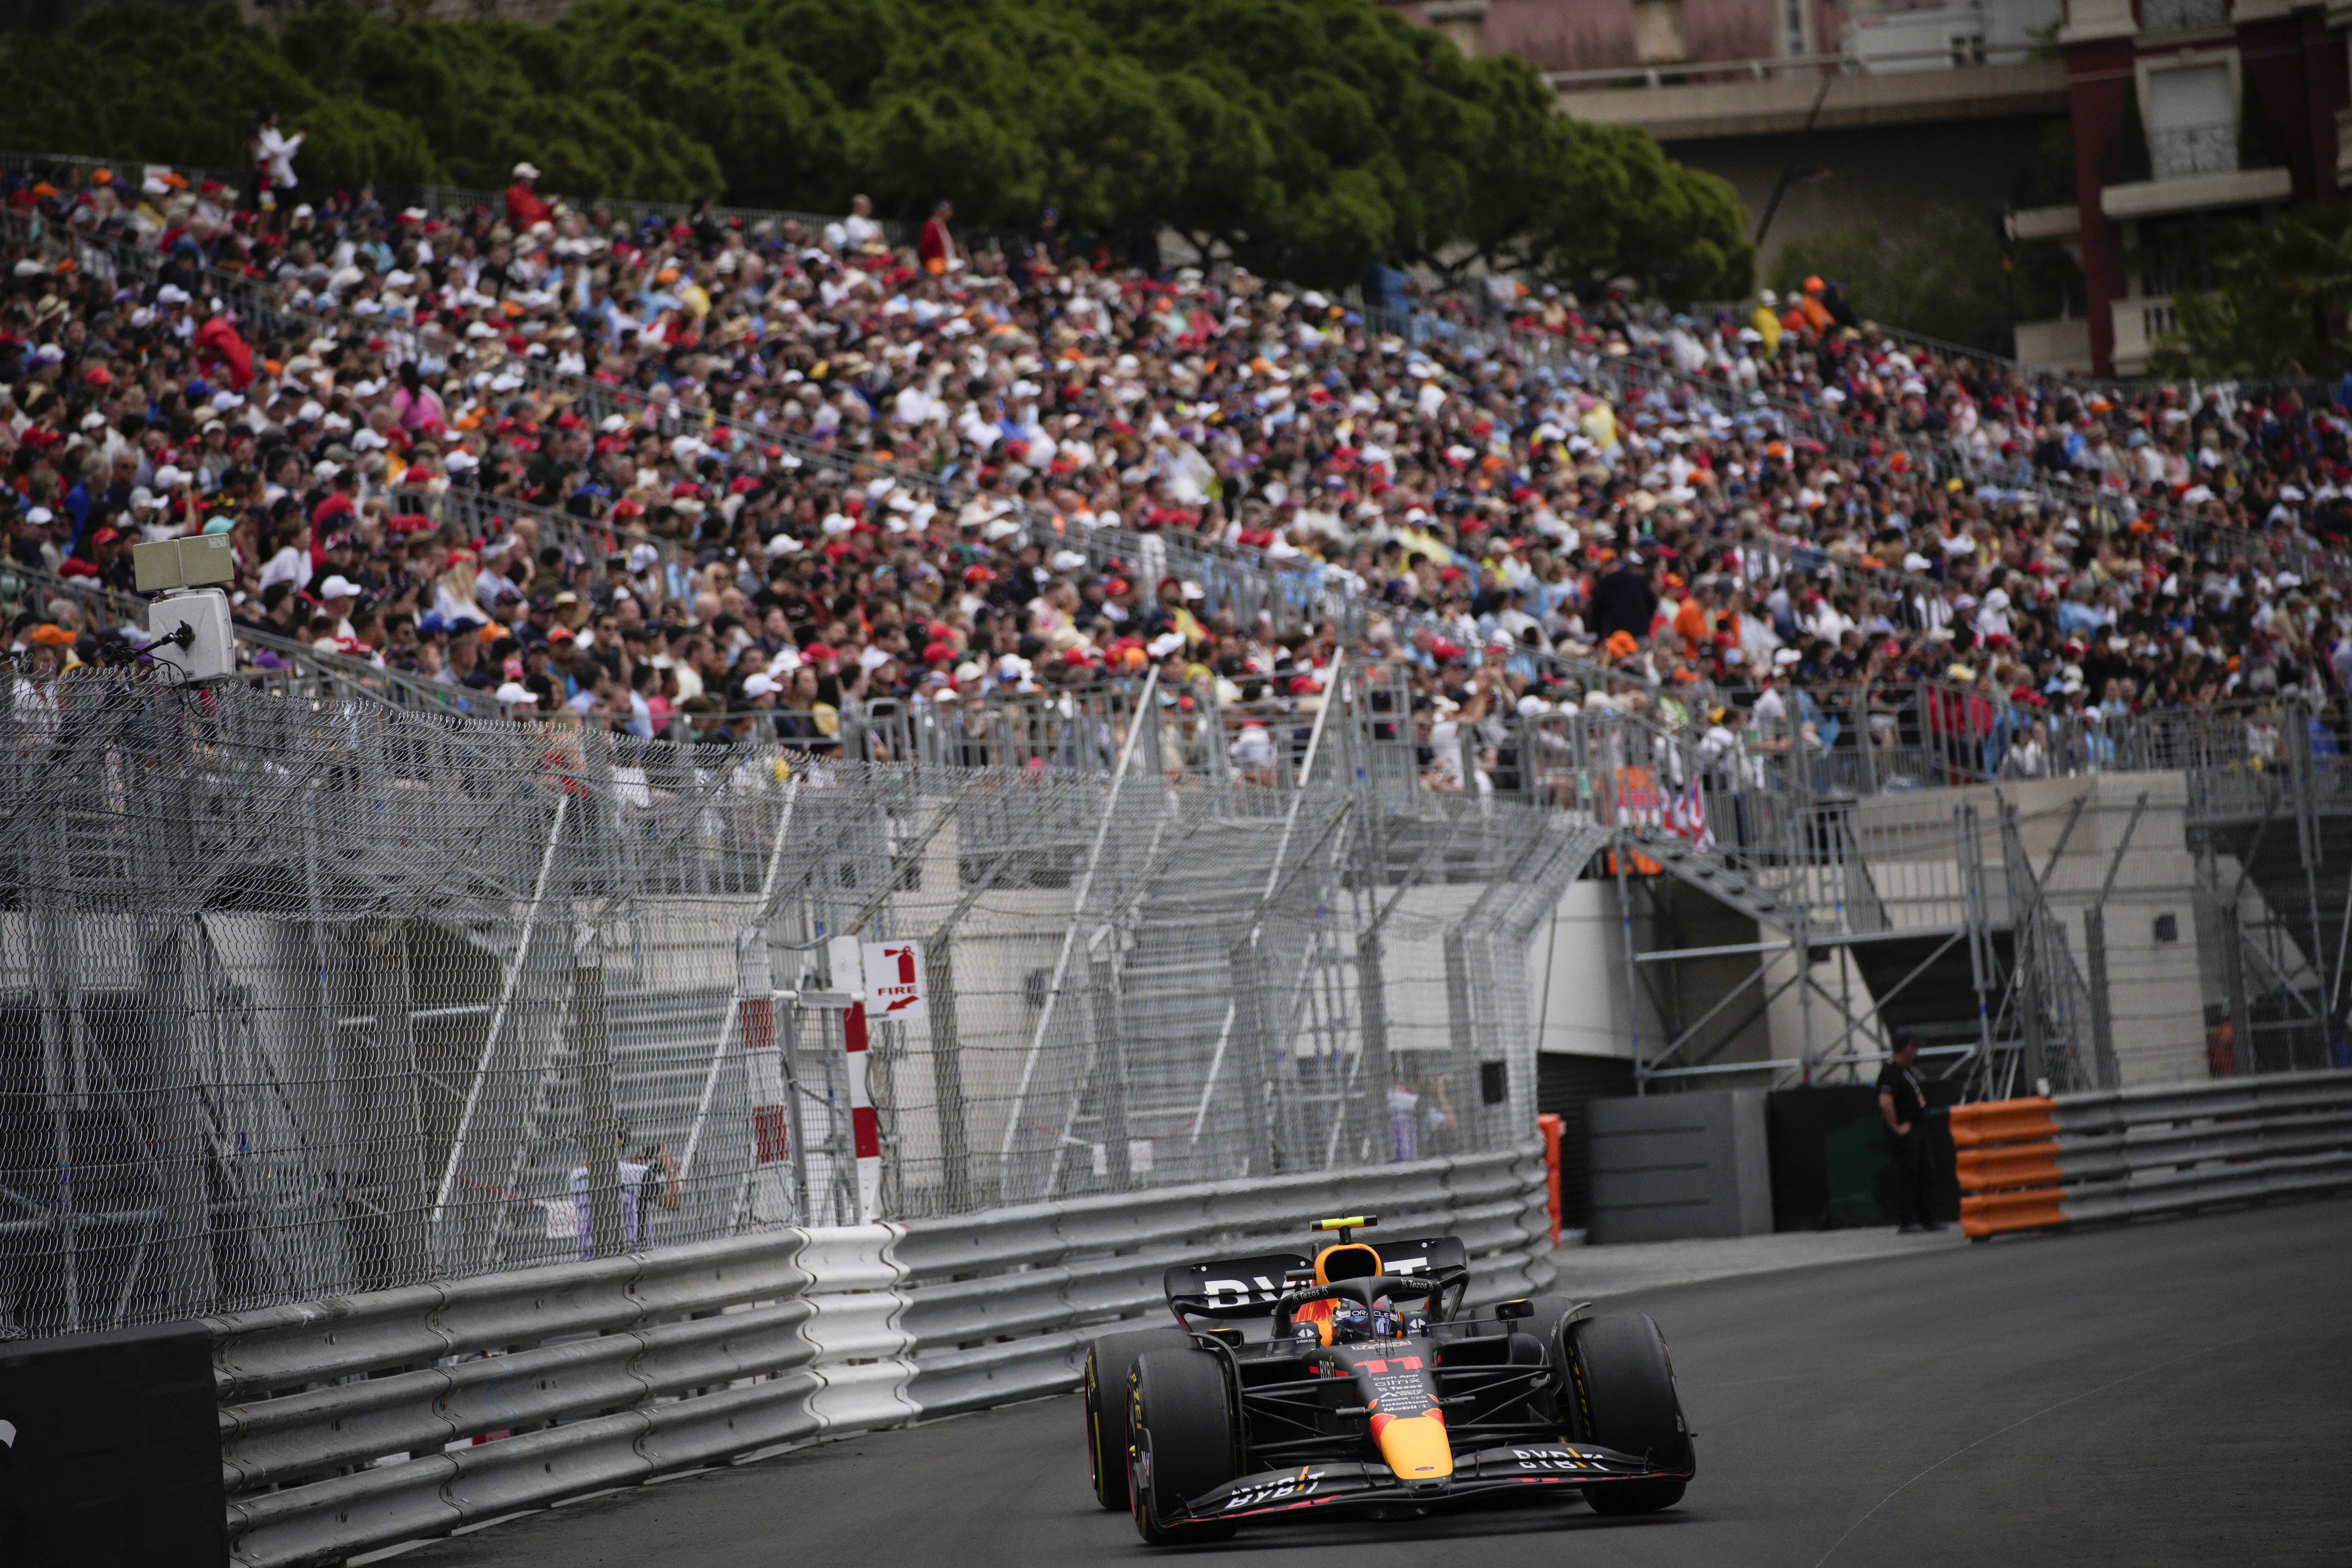 How to Watch the 2023 Monaco Grand Prix - Formula 1 Channel, Stream, Preview